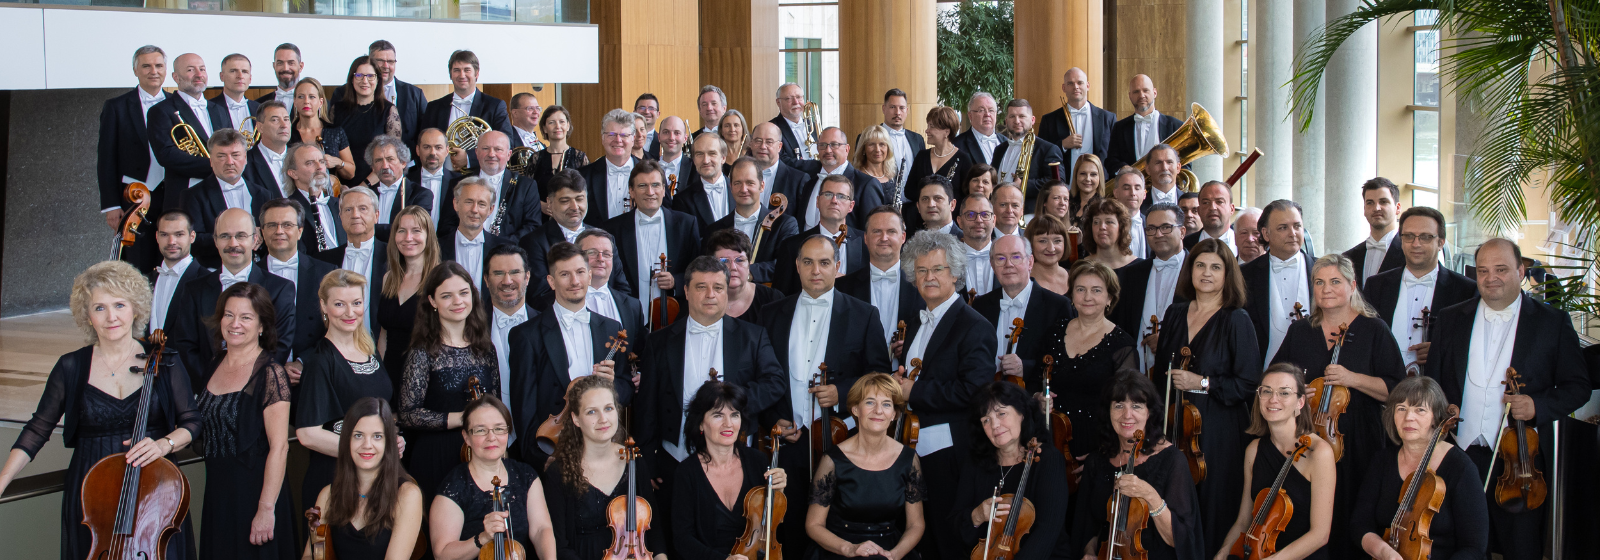 II. Haydneum Festival of Sacred Music – Concert of the Hungarian National Philharmonic Orchestra – MAKÓ